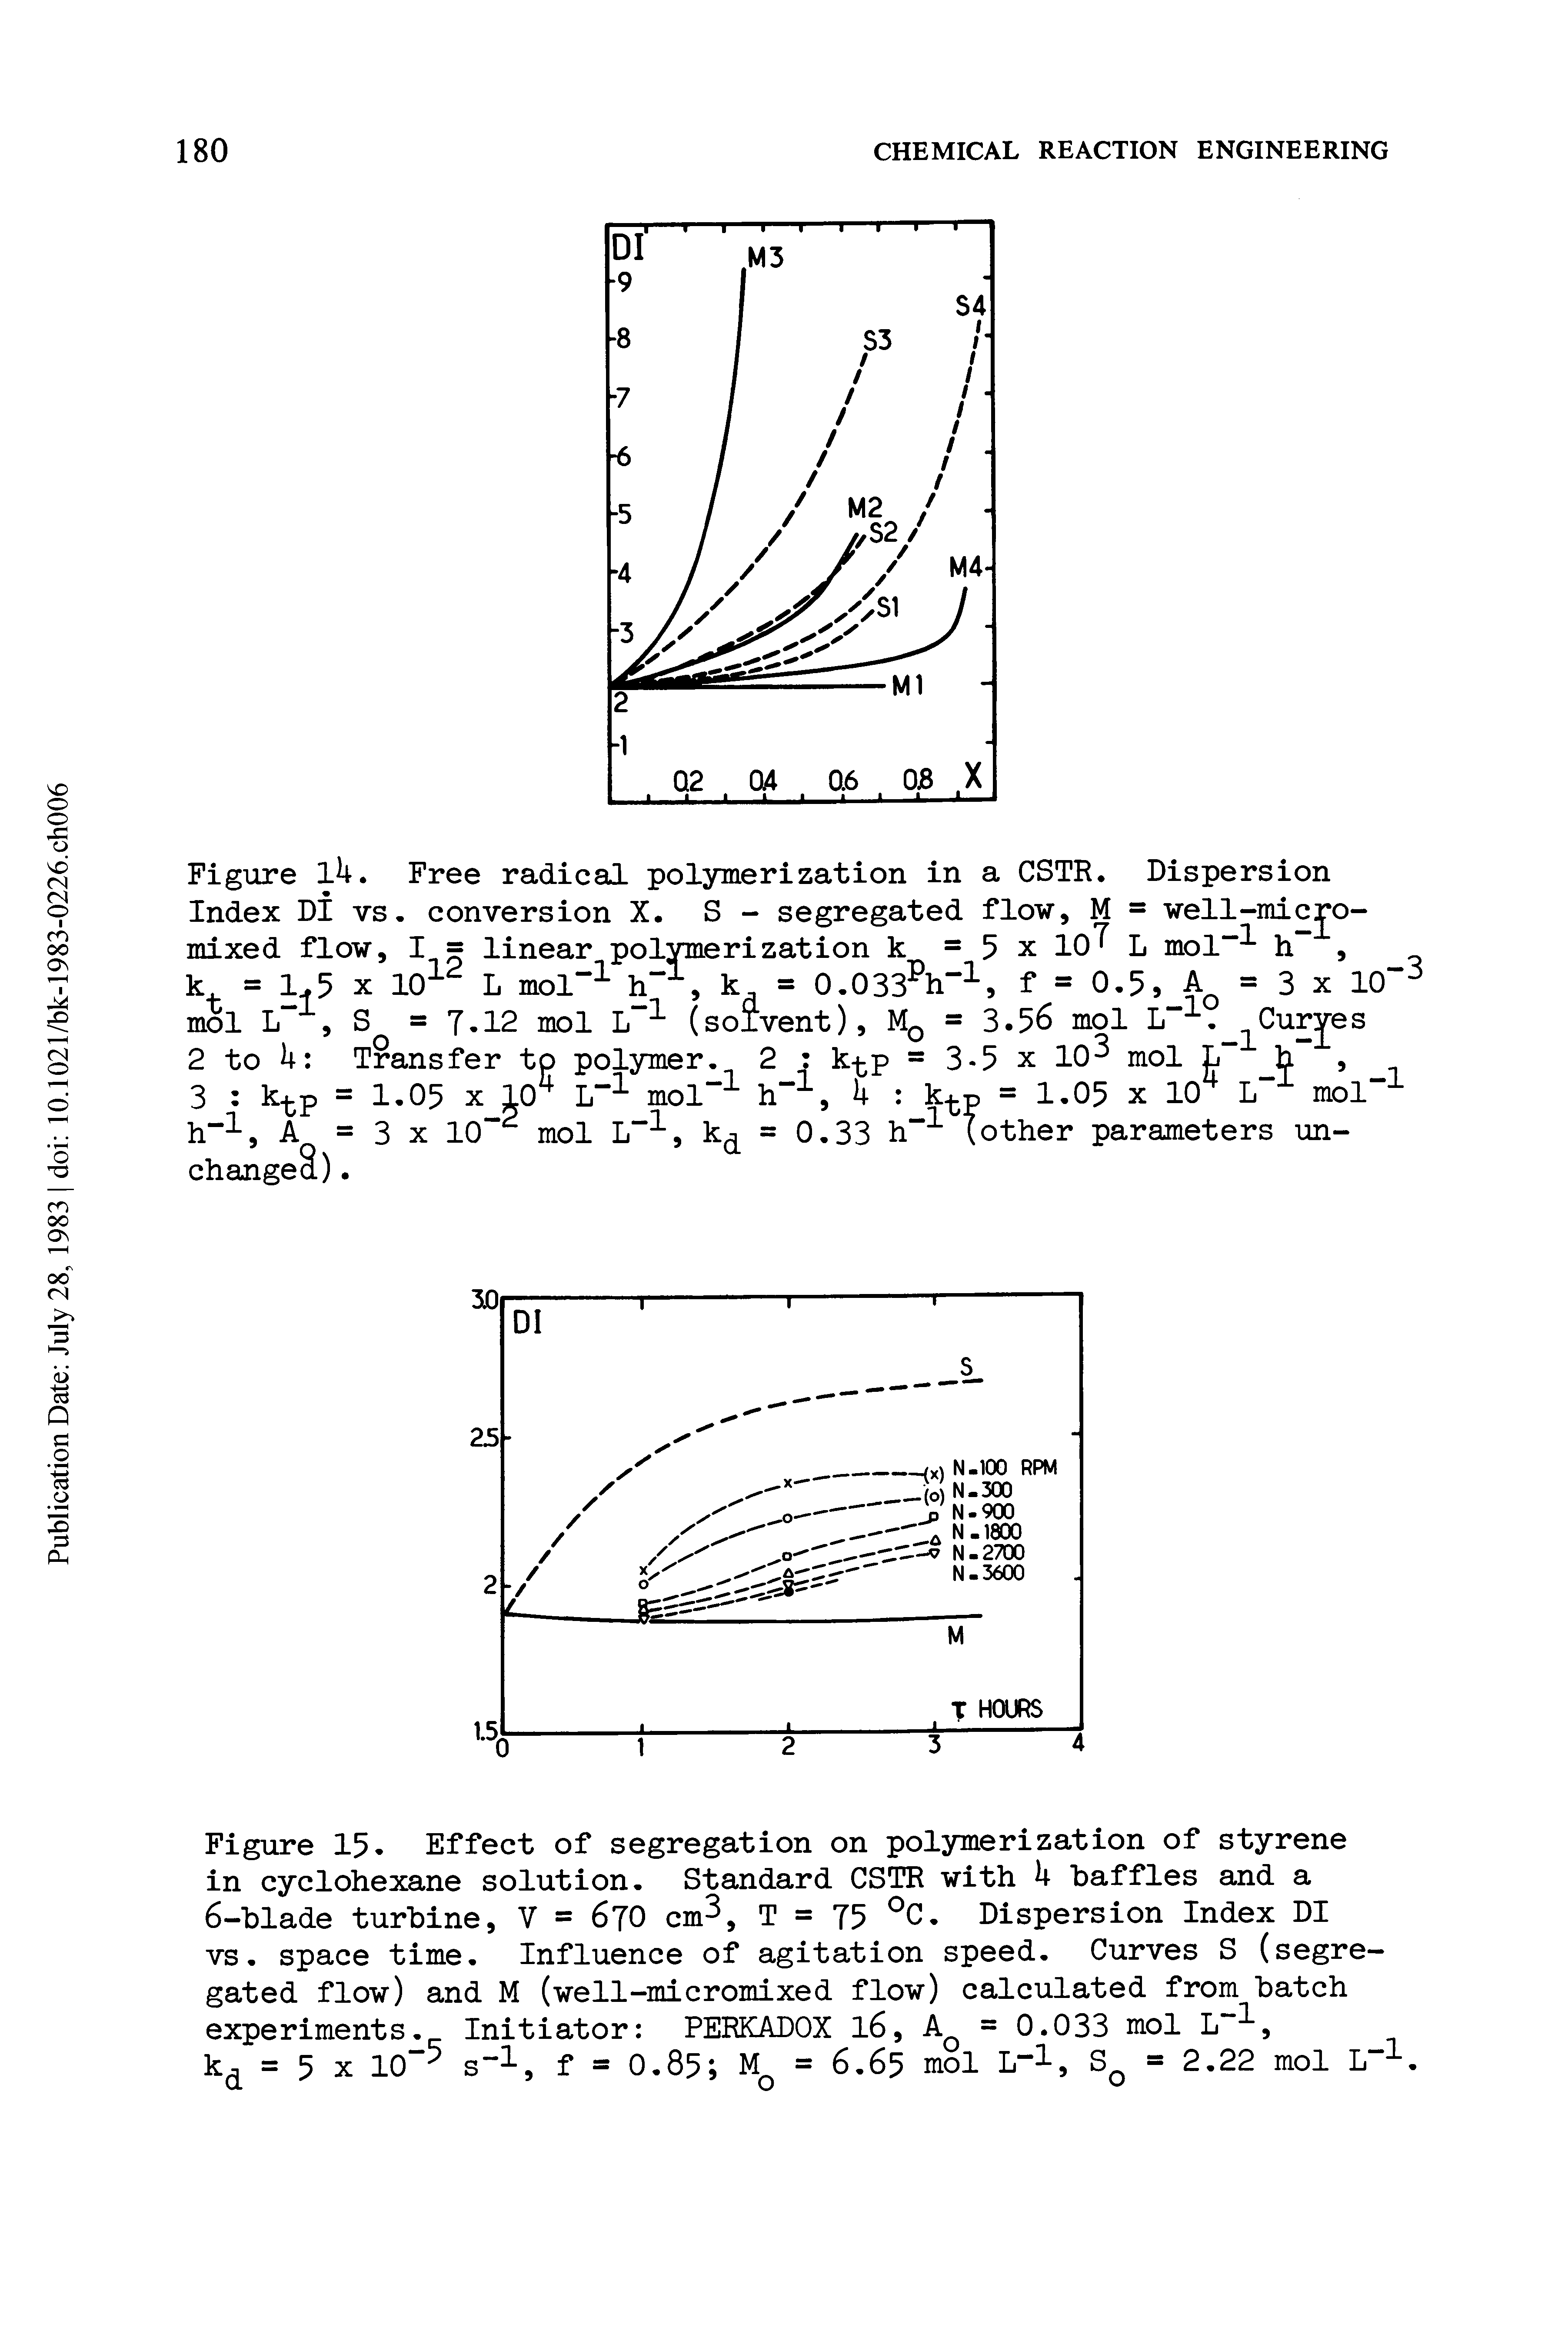 Figure 15. Effect of segregation on polymerization of styrene in cyclohexane solution. Standard CSTR with h baffles and a 6-blade turbine, V = 670 cm, T = 75 °C. Dispersion Index DI vs. space time. Influence of agitation speed. Curves S (segregated flow) and M (well-micromixed flow) calculated from batch experiments. Initiator PERKAD0X l6, A = 0.033 mol L - -, kd = 5 x 10 5 s-1, f = 0.85 Mq = 6.65 mol L l, SQ = 2.22 mol IT1.